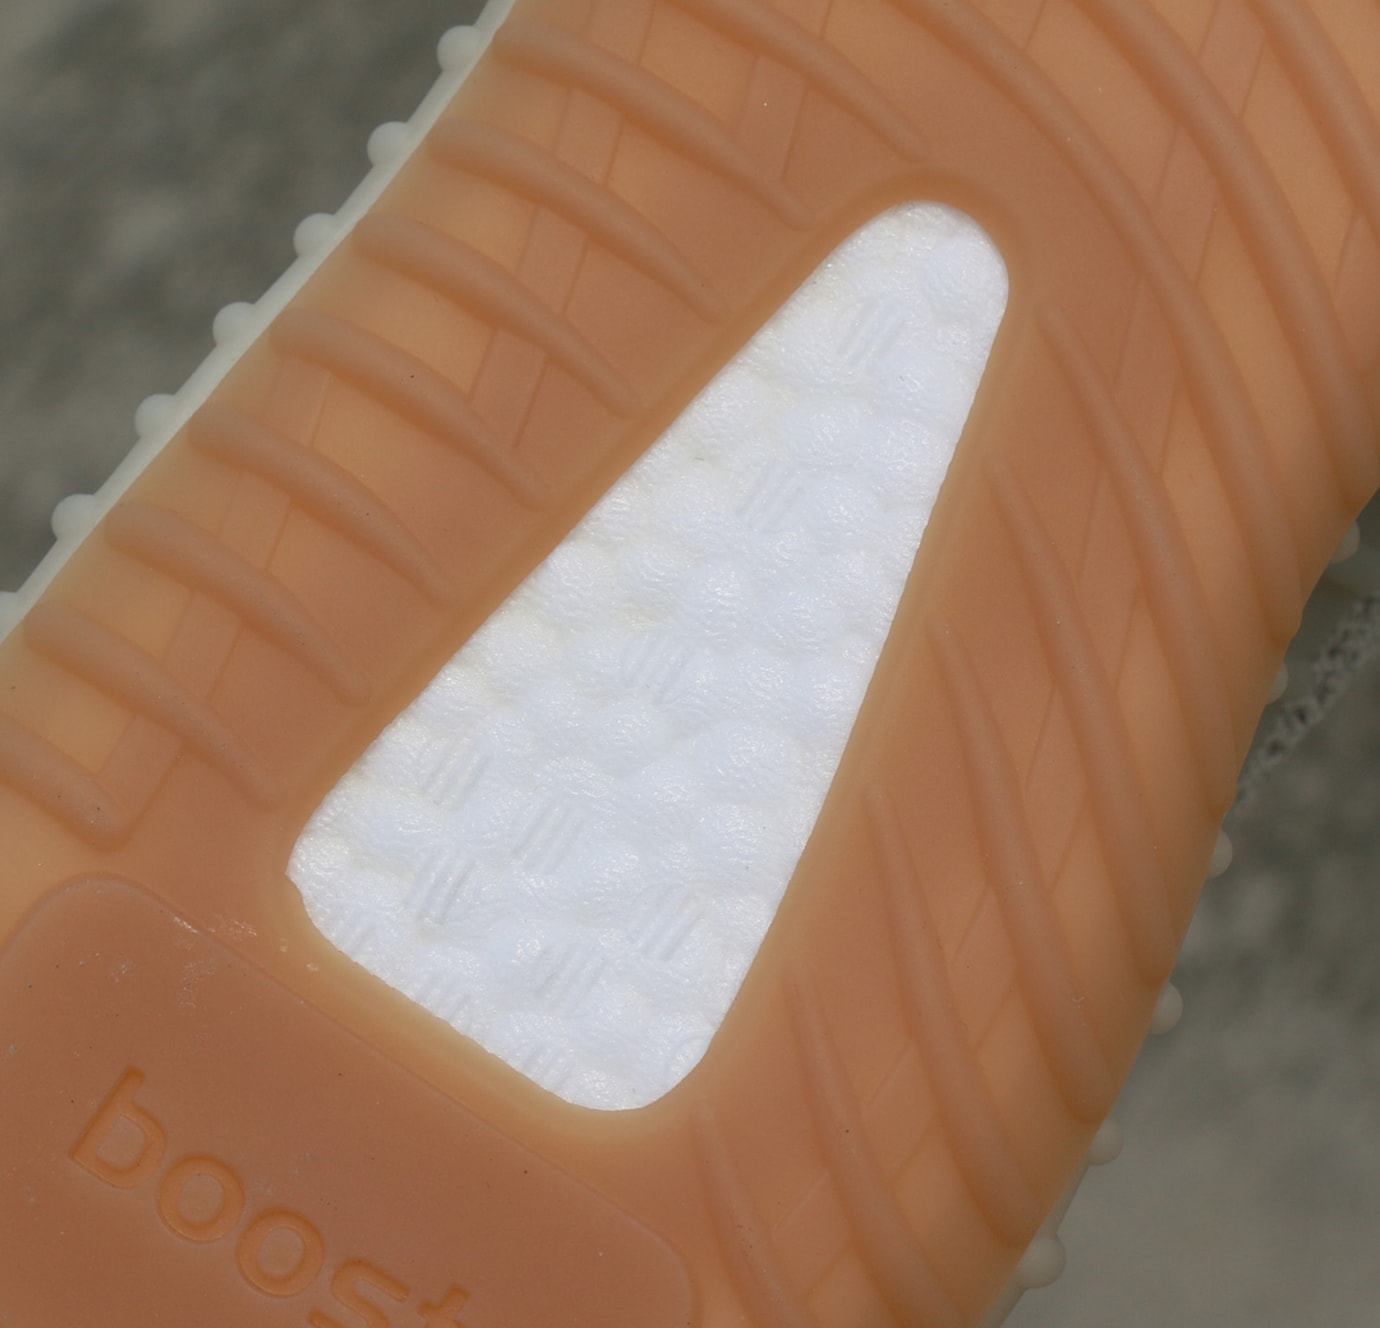 Yeezy Boost 350 V2 Ice Yellow and Sesame Dropping in